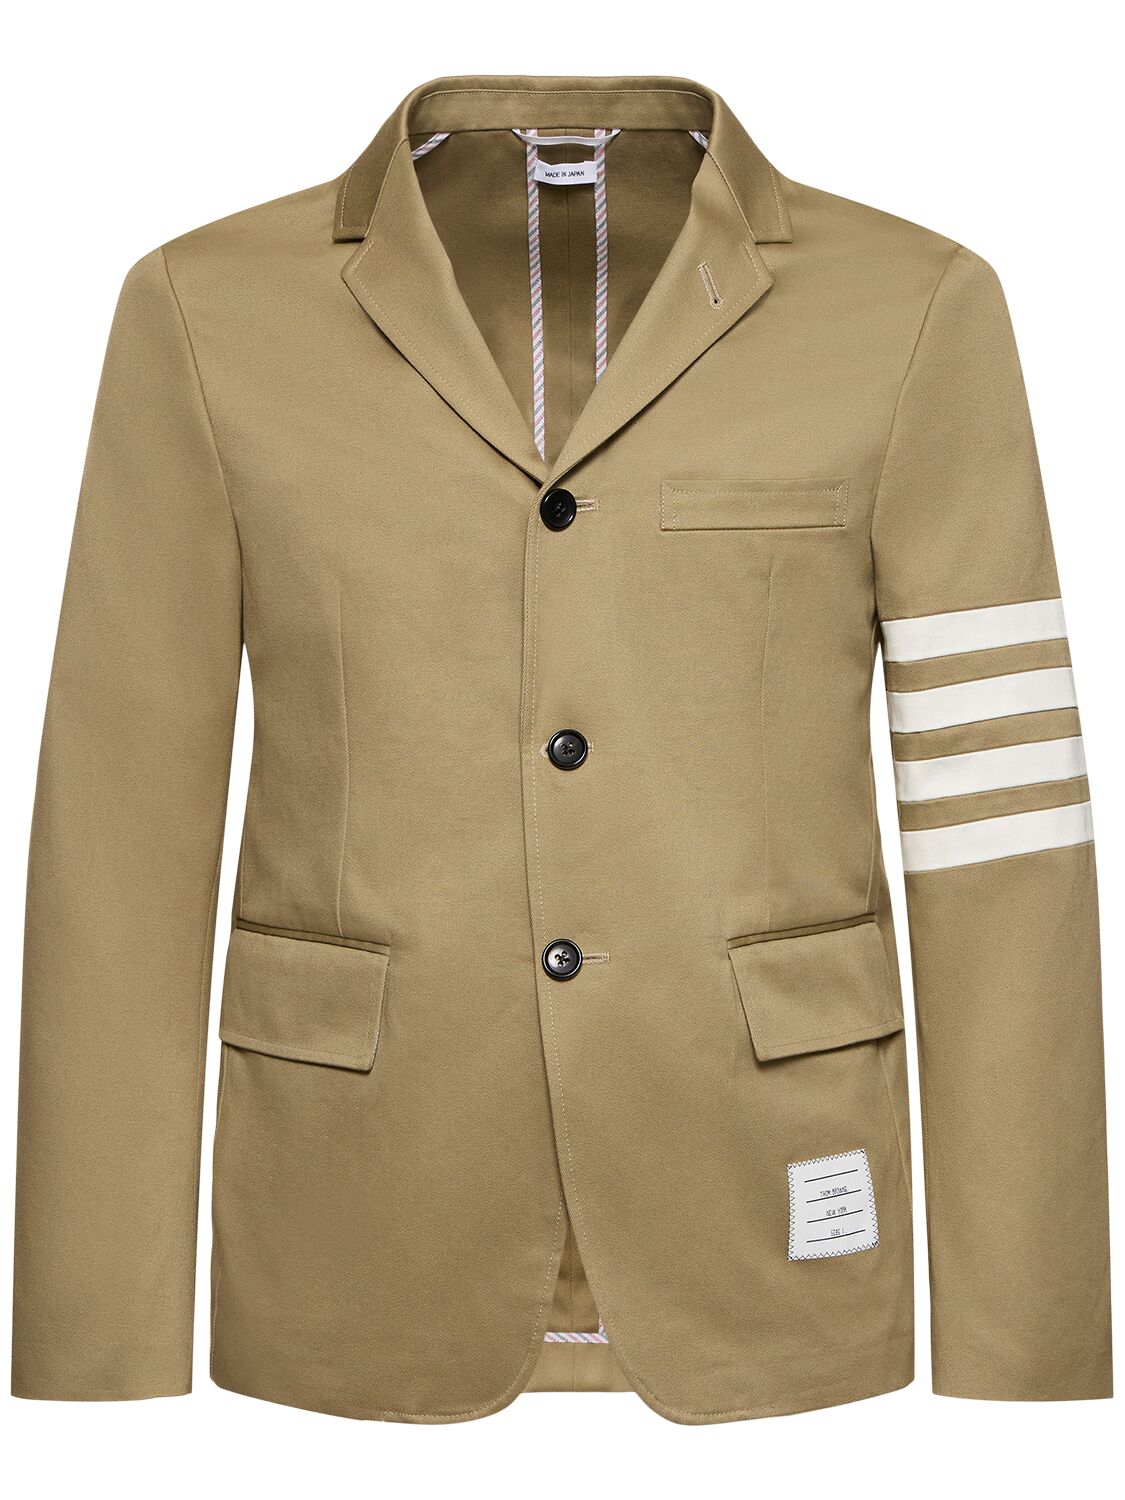 Image of Unconstructed Classic Sport Jacket